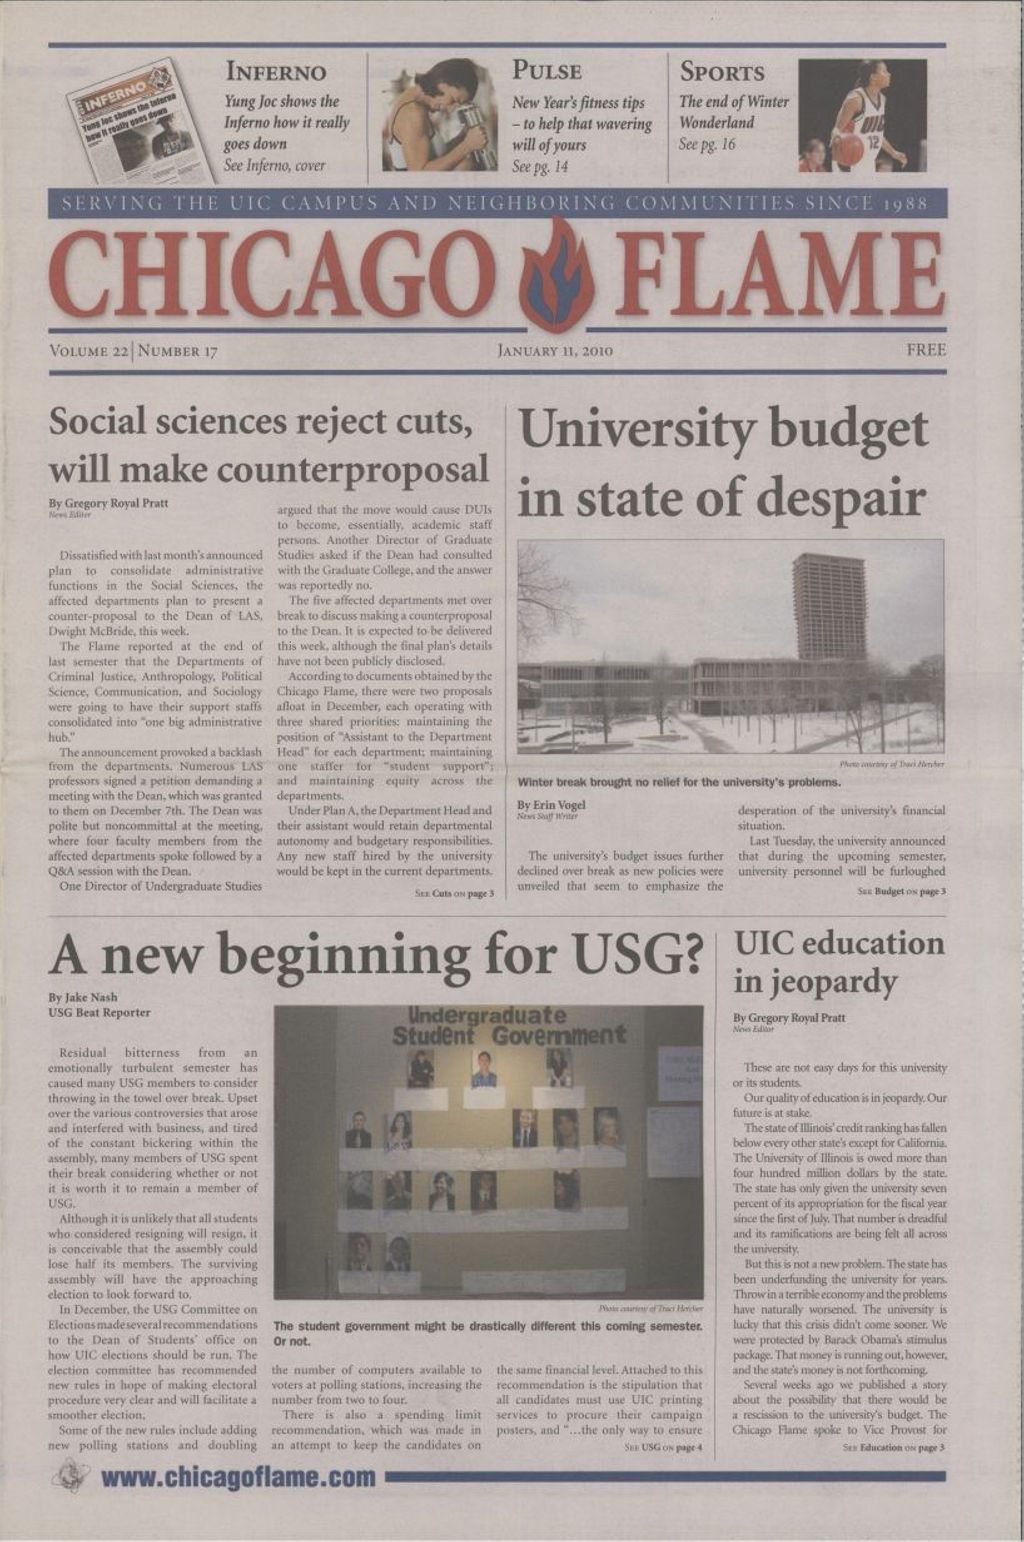 Miniature of Chicago Flame (January 11, 2010)